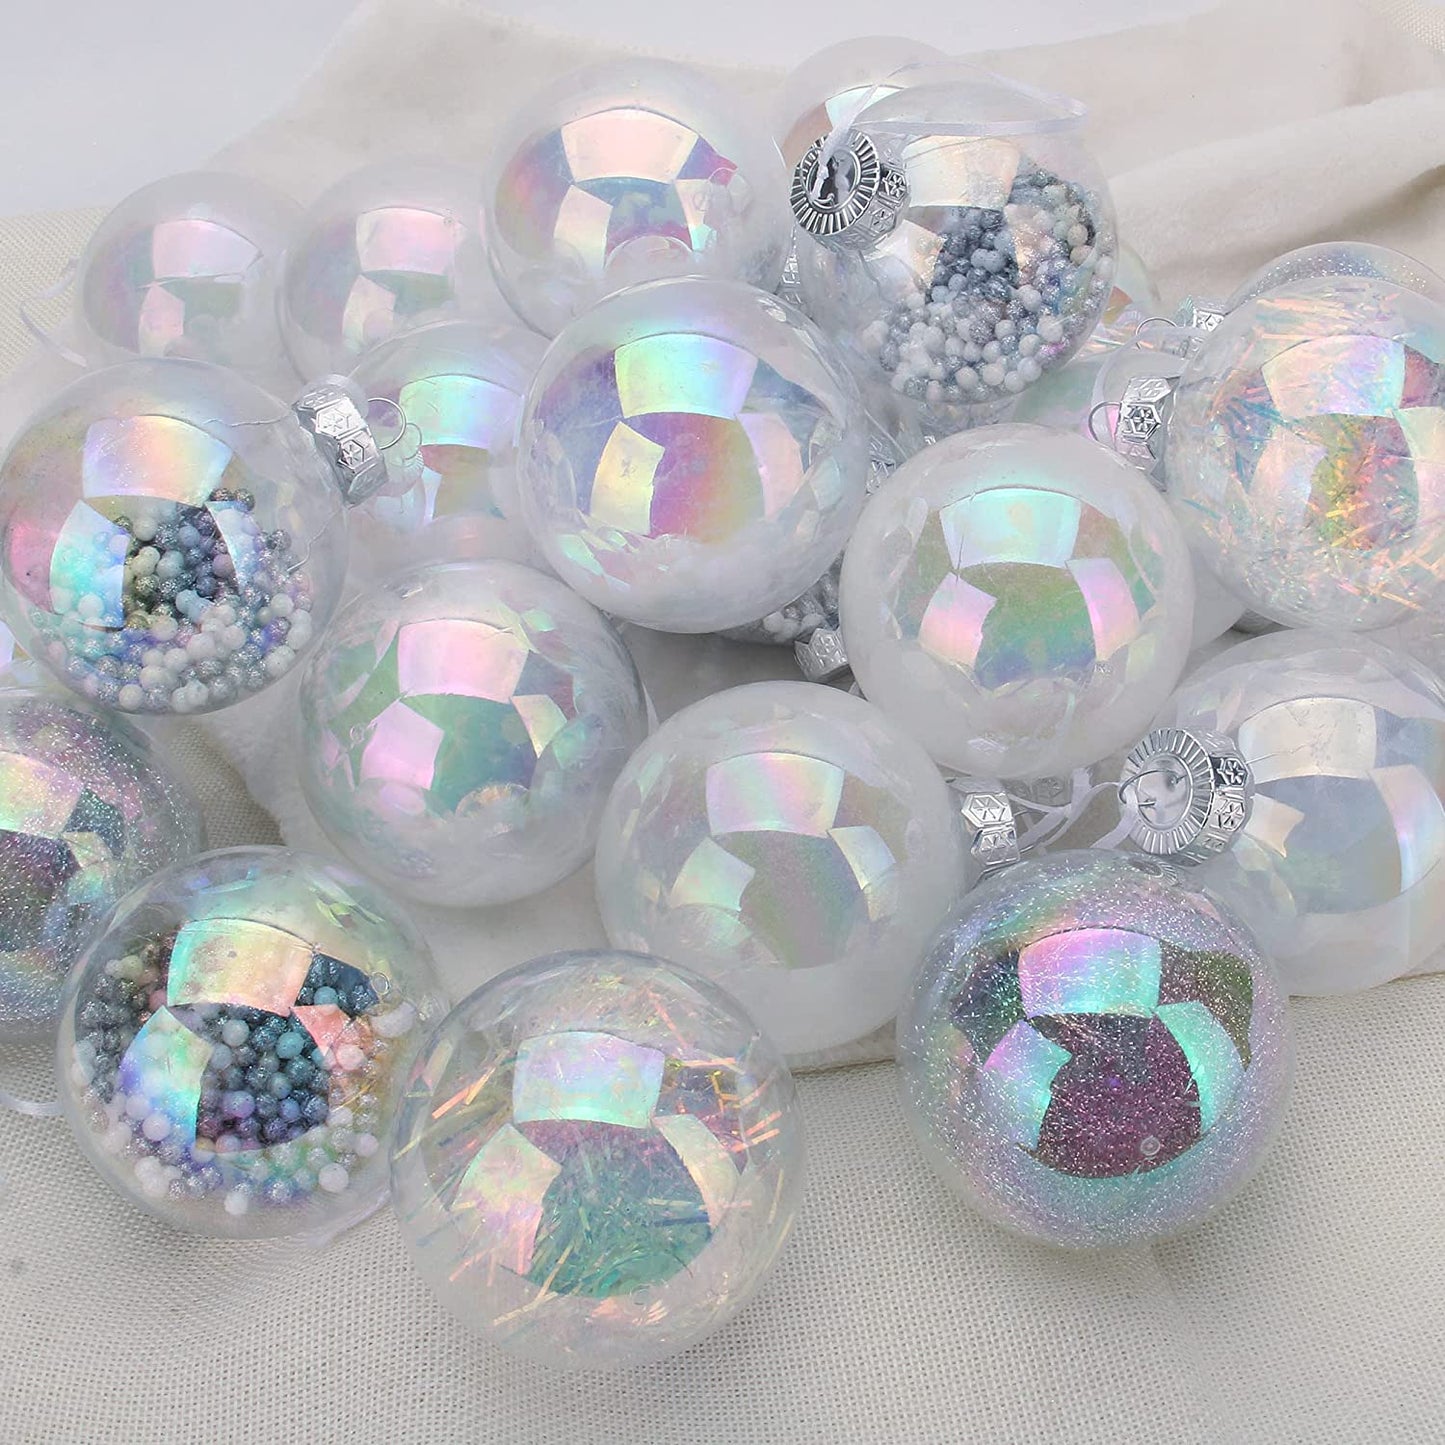 24Pcs Chrome Plastic Clear Ball Ornaments with Filling